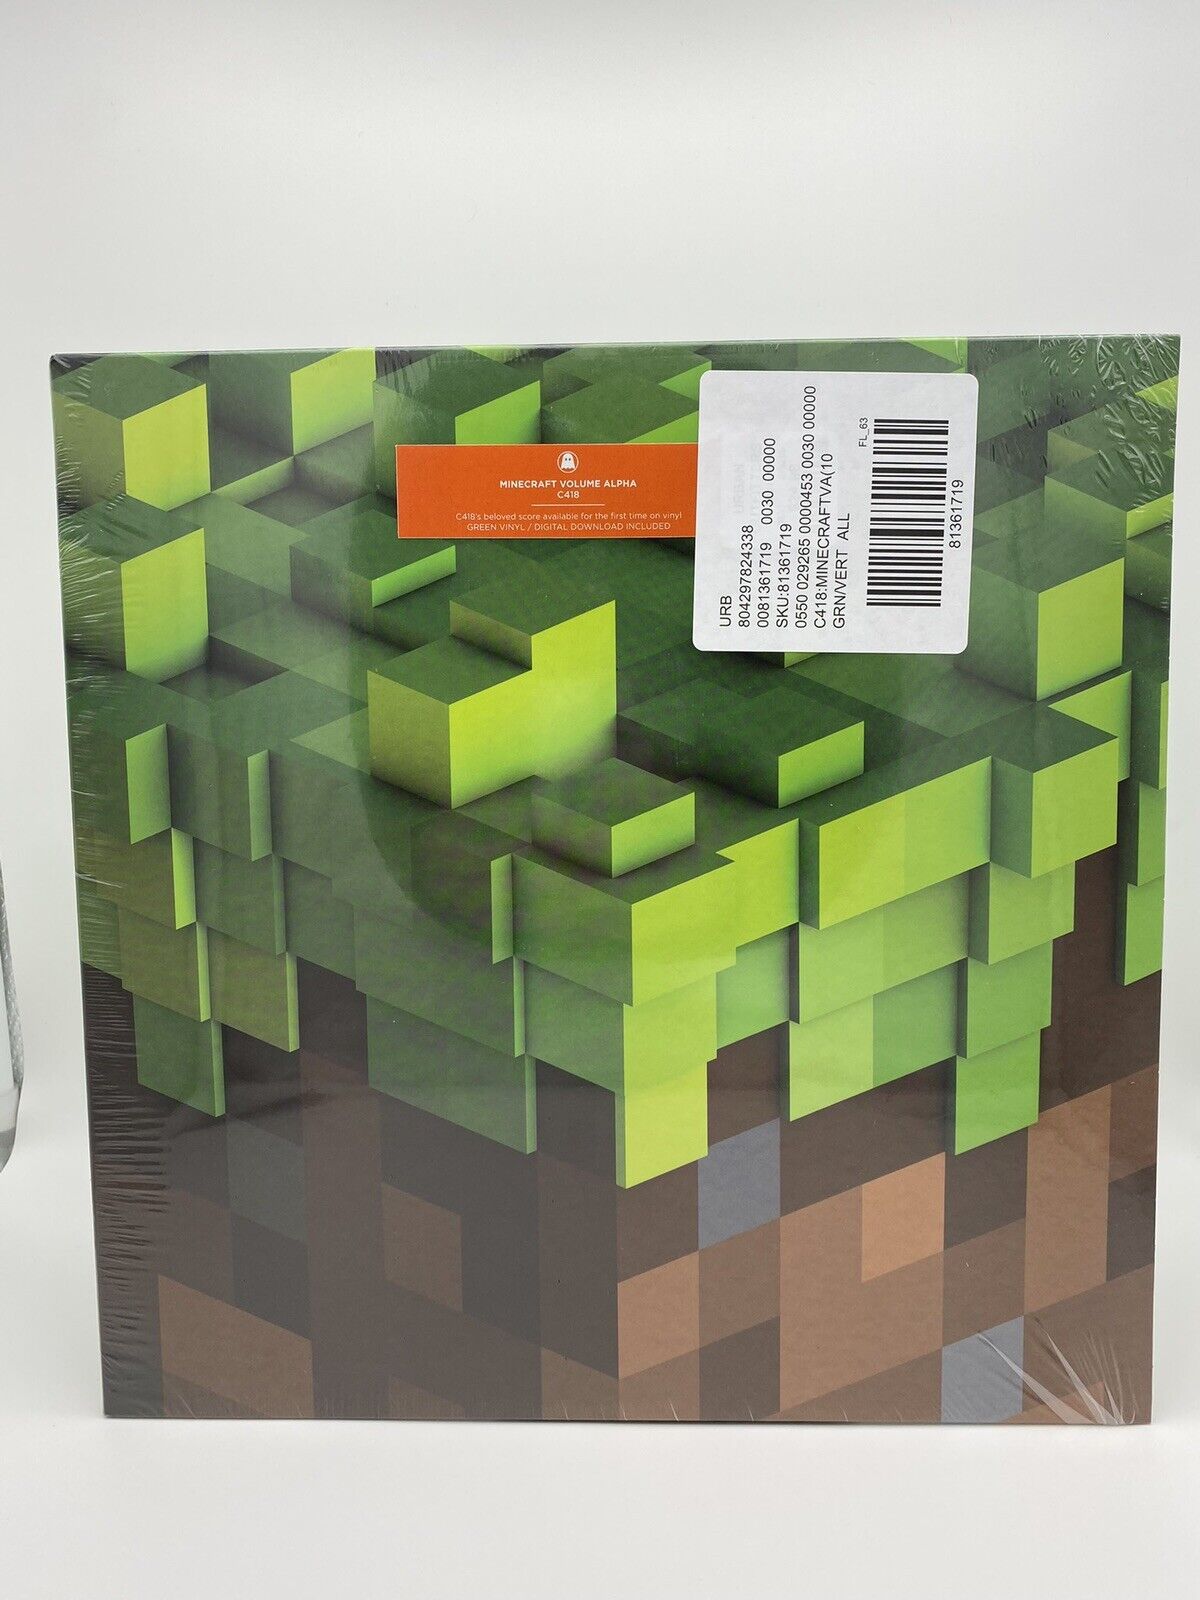 Minecraft Classic Soundtrack : C418 : Free Download, Borrow, and